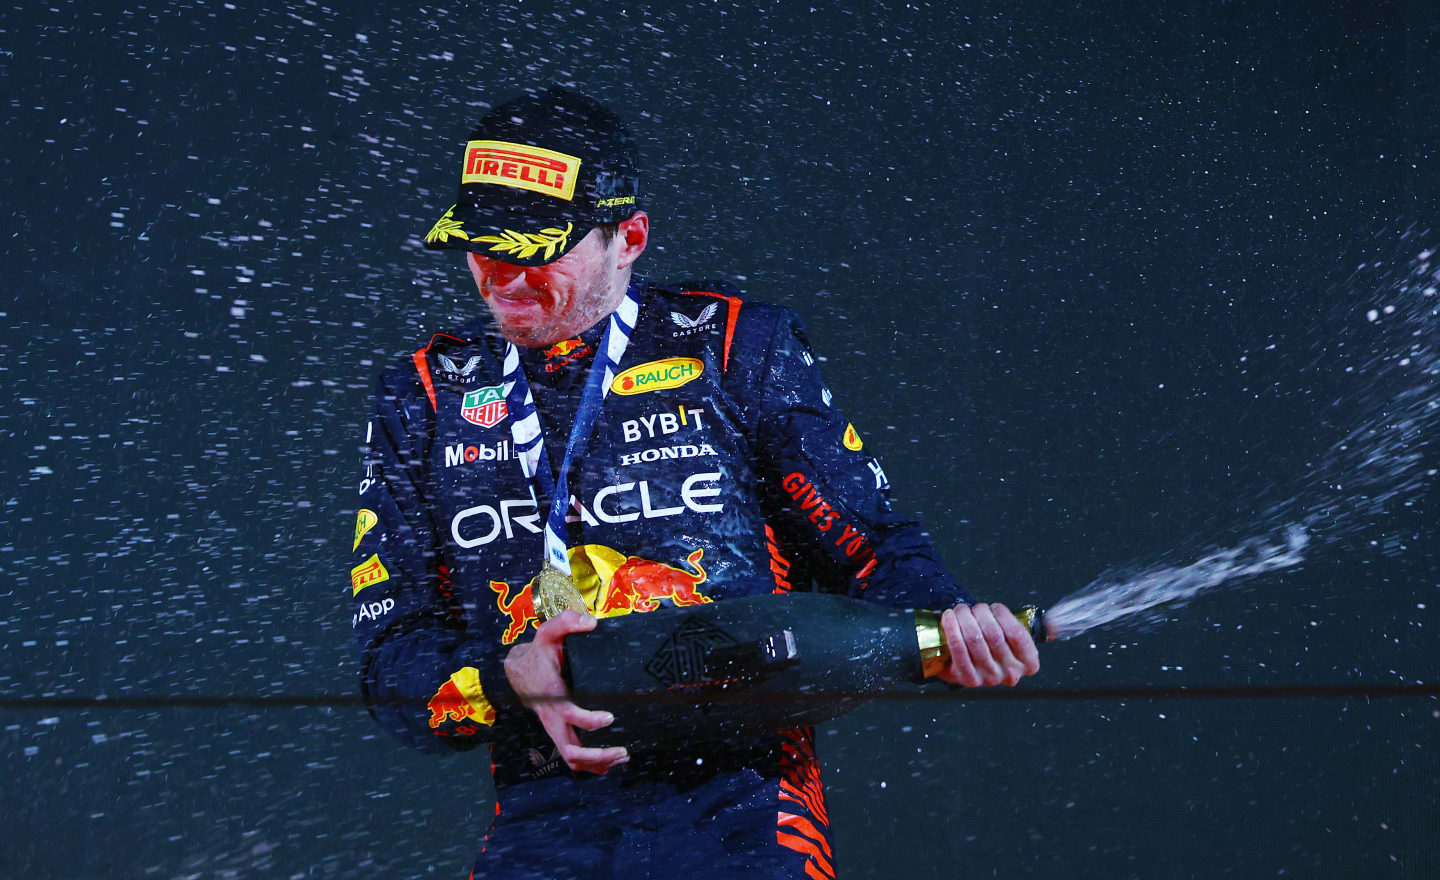 BAHRAIN, BAHRAIN - MARCH 05: Race winner Max Verstappen of the Netherlands and Oracle Red Bull Racing celebrates on the podium during the F1 Grand Prix of Bahrain at Bahrain International Circuit on March 05, 2023 in Bahrain, Bahrain. (Photo by Mark Thompson/Getty Images)